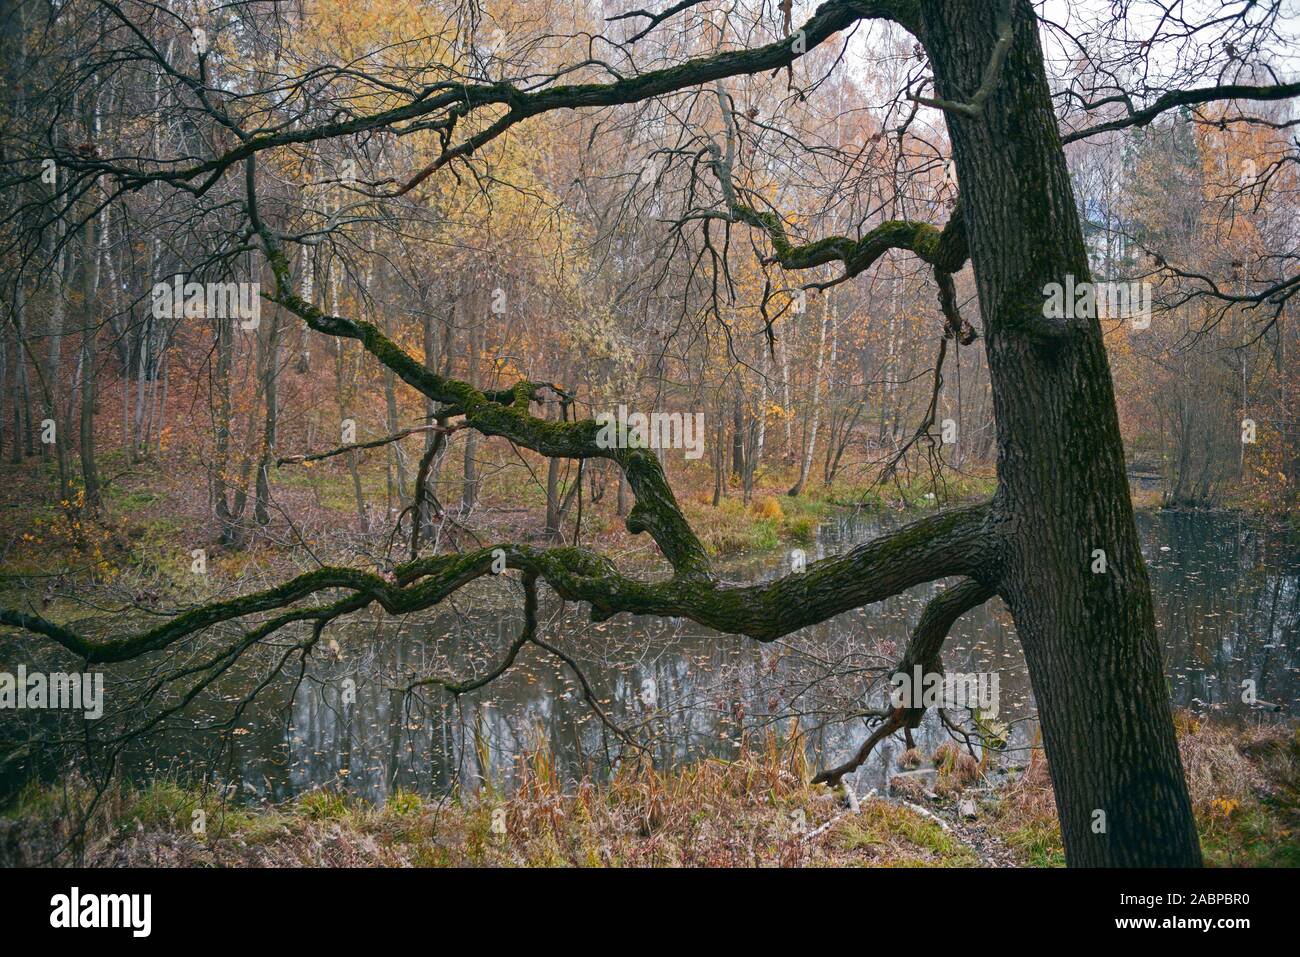 Old oak with moss-covered branches in an old autumn park Stock Photo